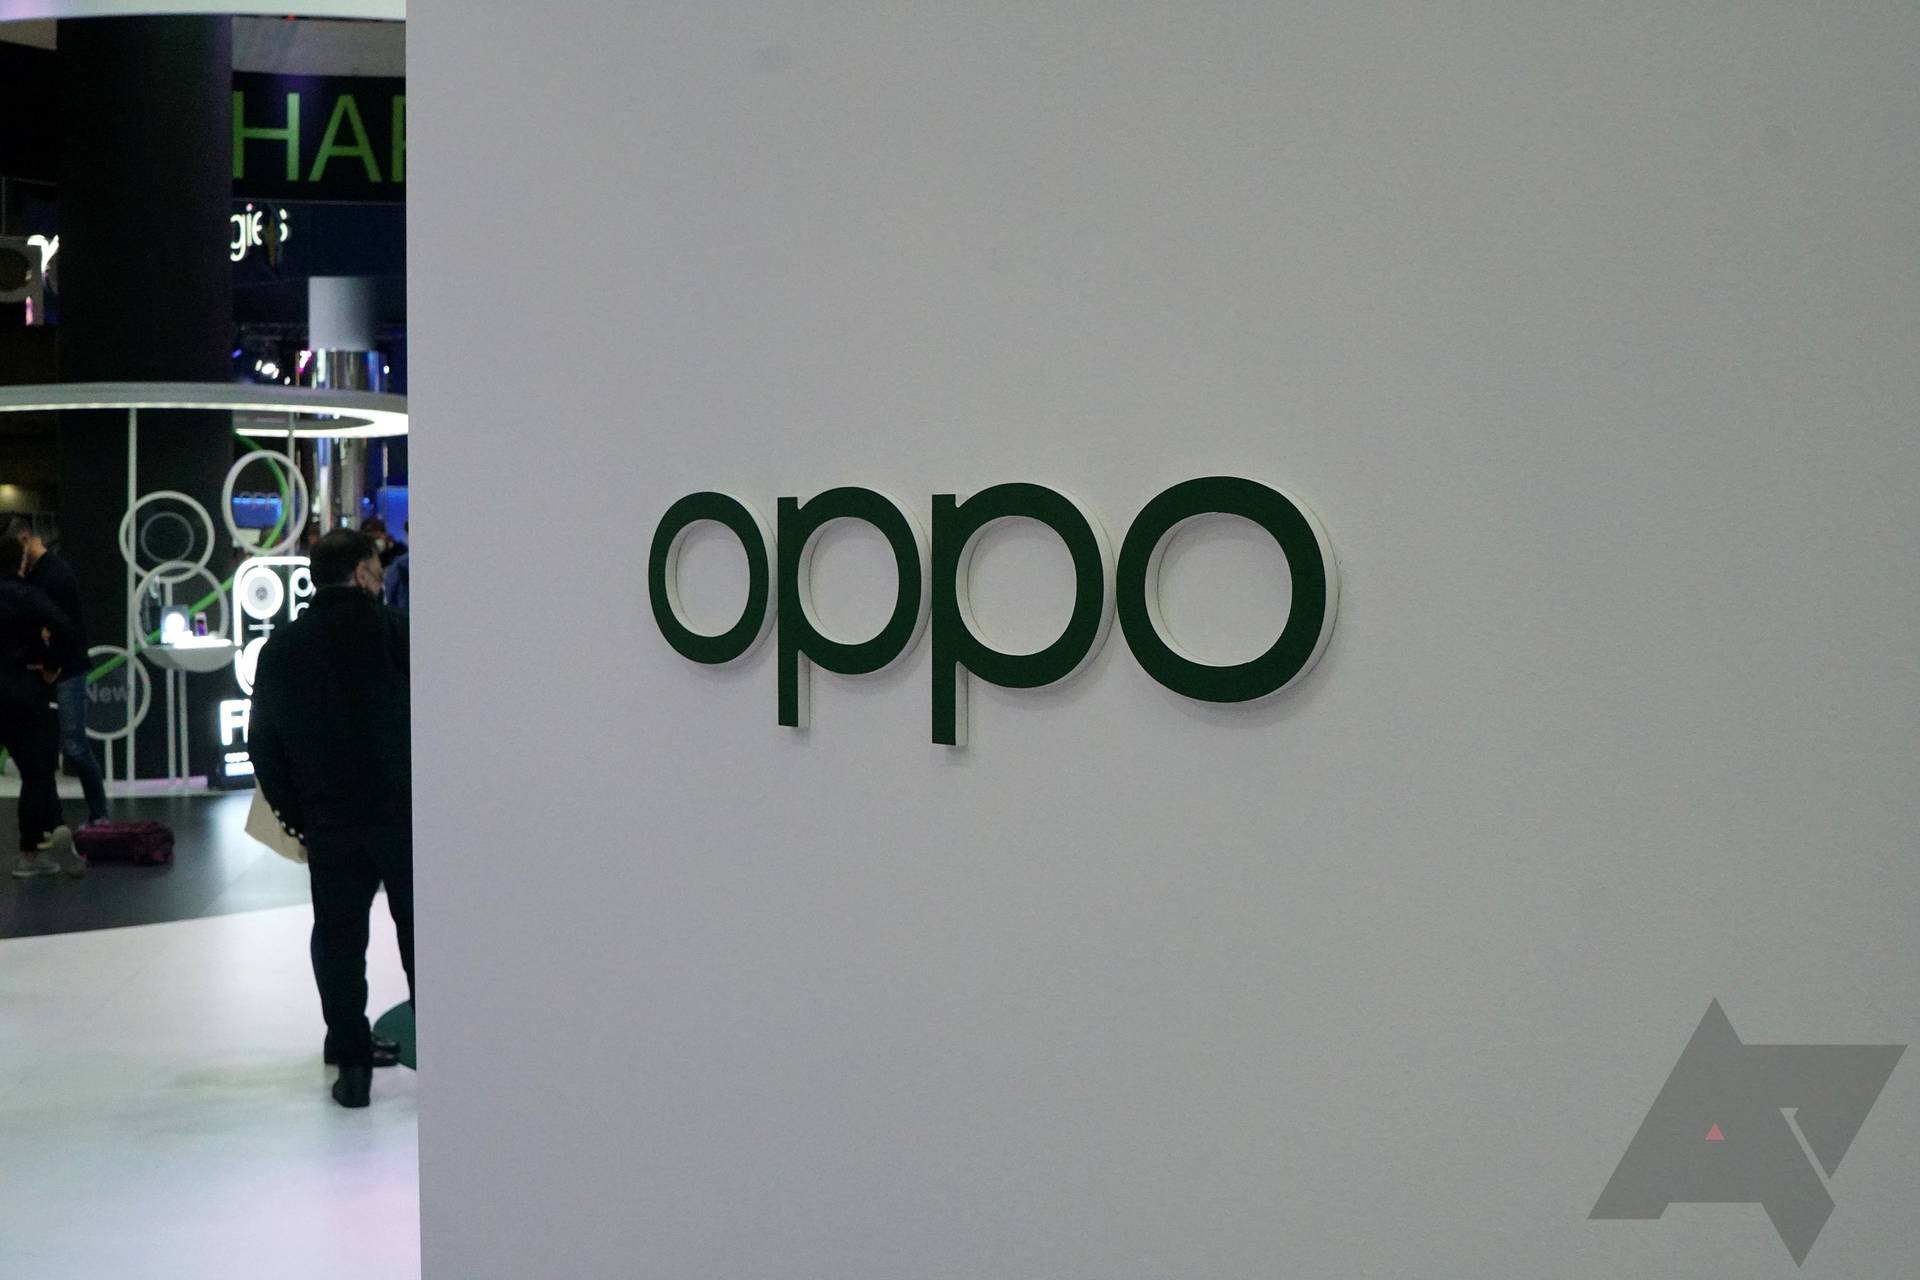 Nokia says Oppo can avoid sales ban by renewing its license on fair terms